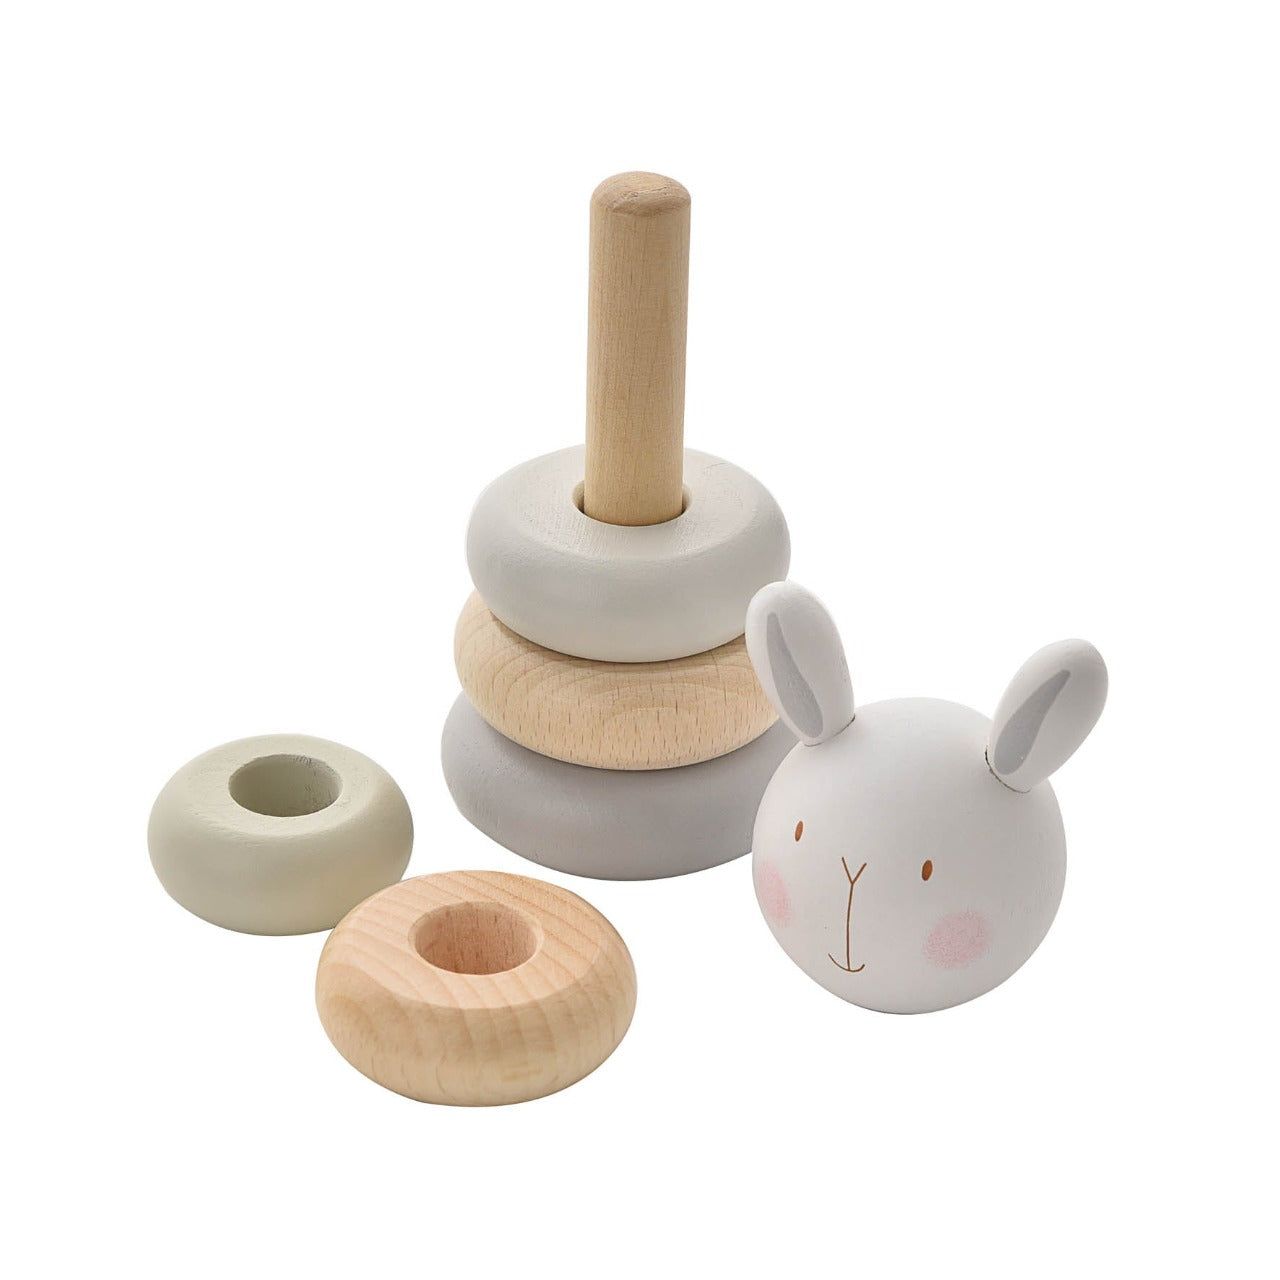 Bambino Wooden Stacking Toy  Help your little one develop their problem solving and coordination skills with one of these adorable wooden character stacking ring toys. From BAMBINO BY JULIANA® - opening new eyes to a world of wonder.